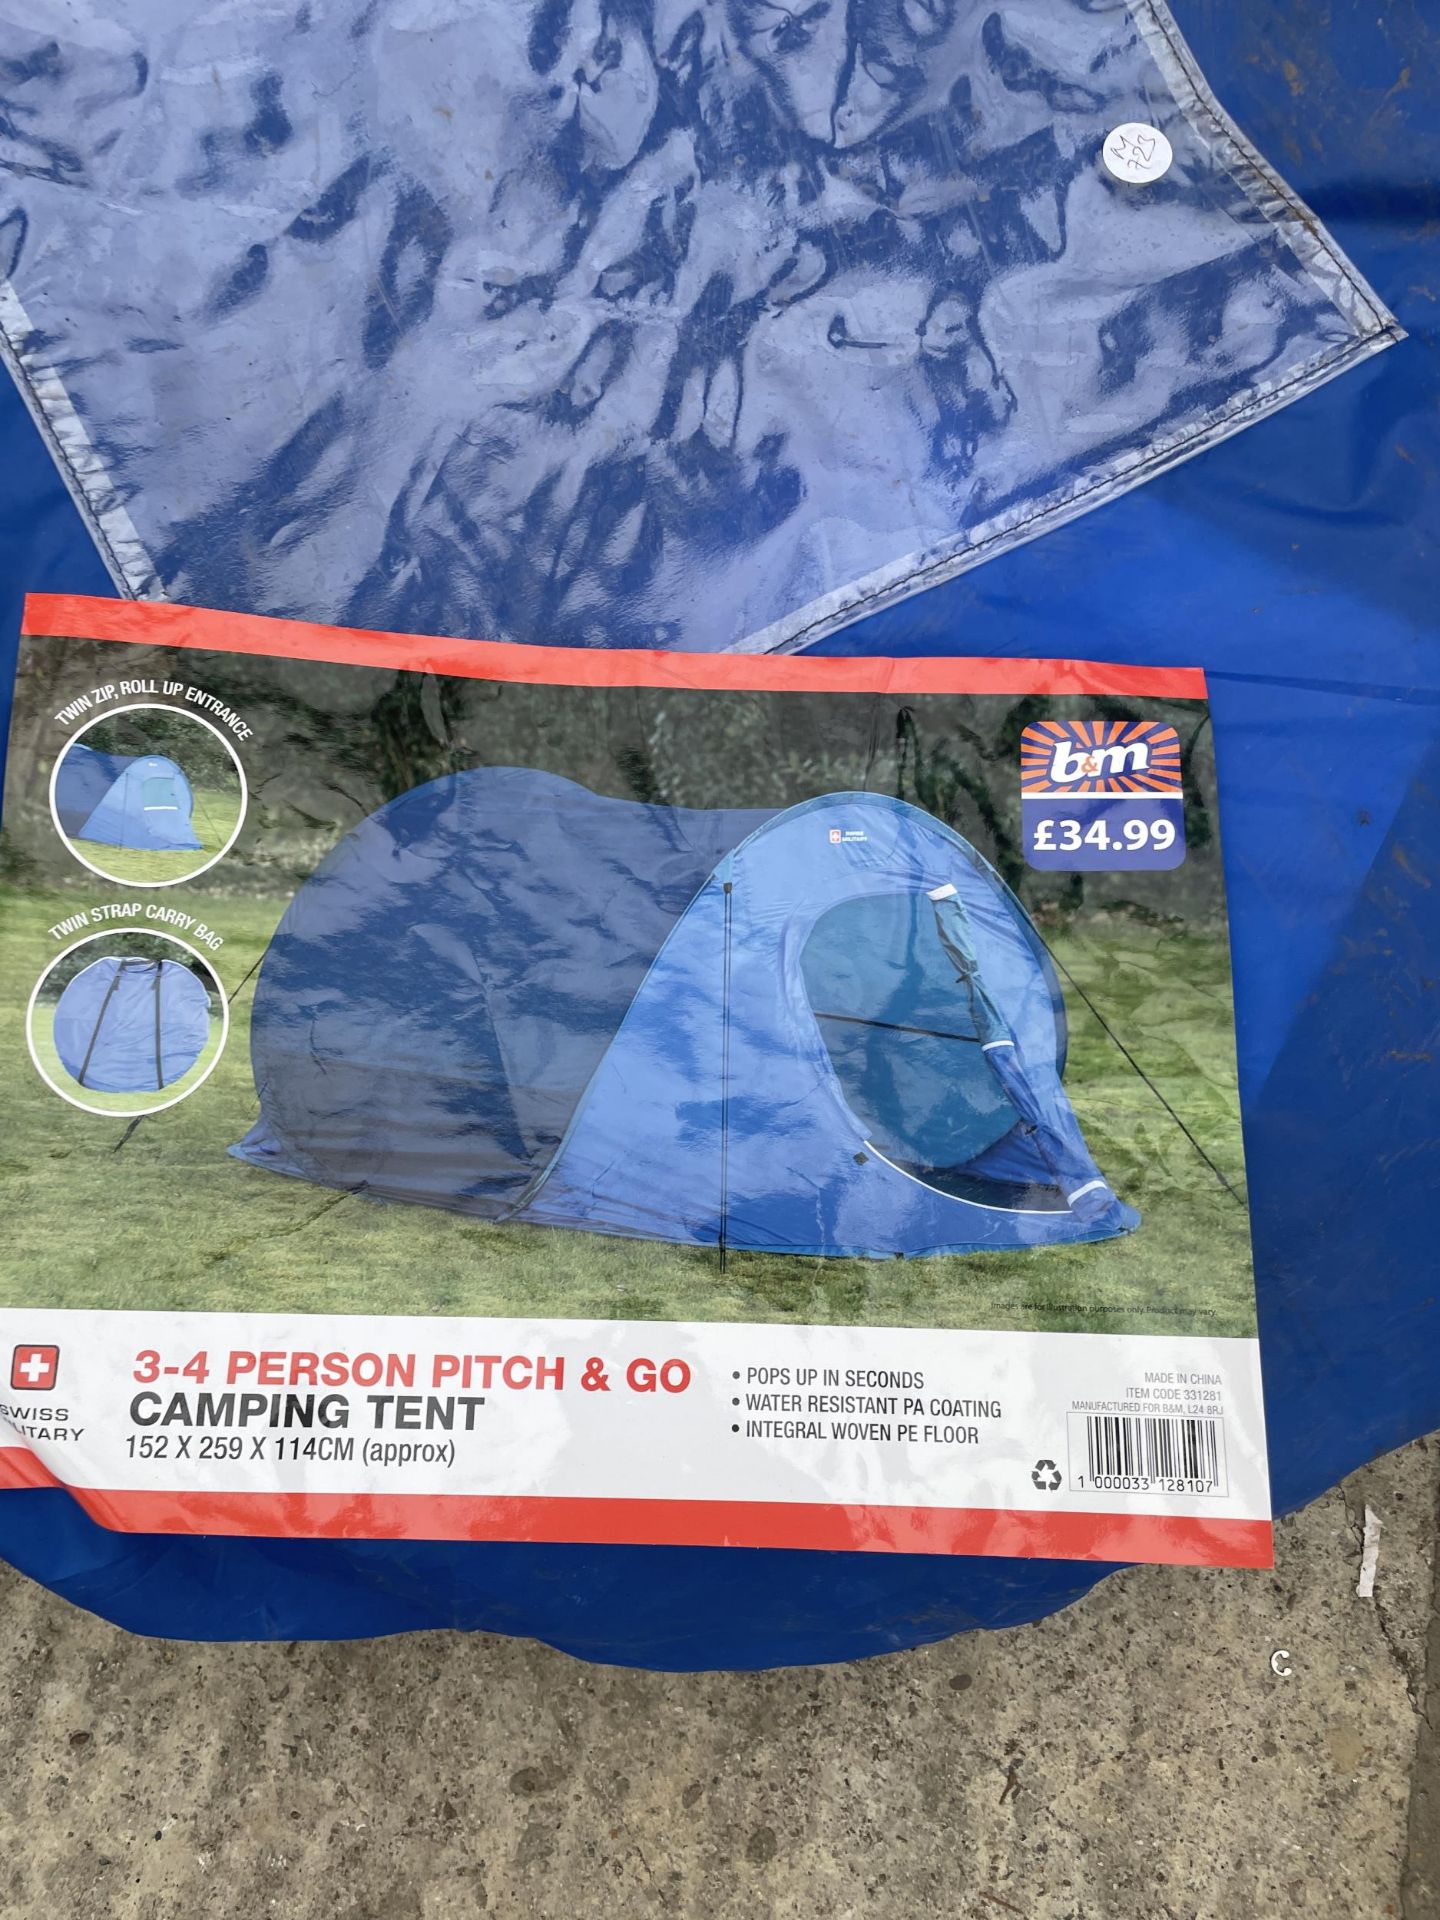 A 3-4 PERSON PITCH AND GO CAMPING TENT - Image 2 of 2